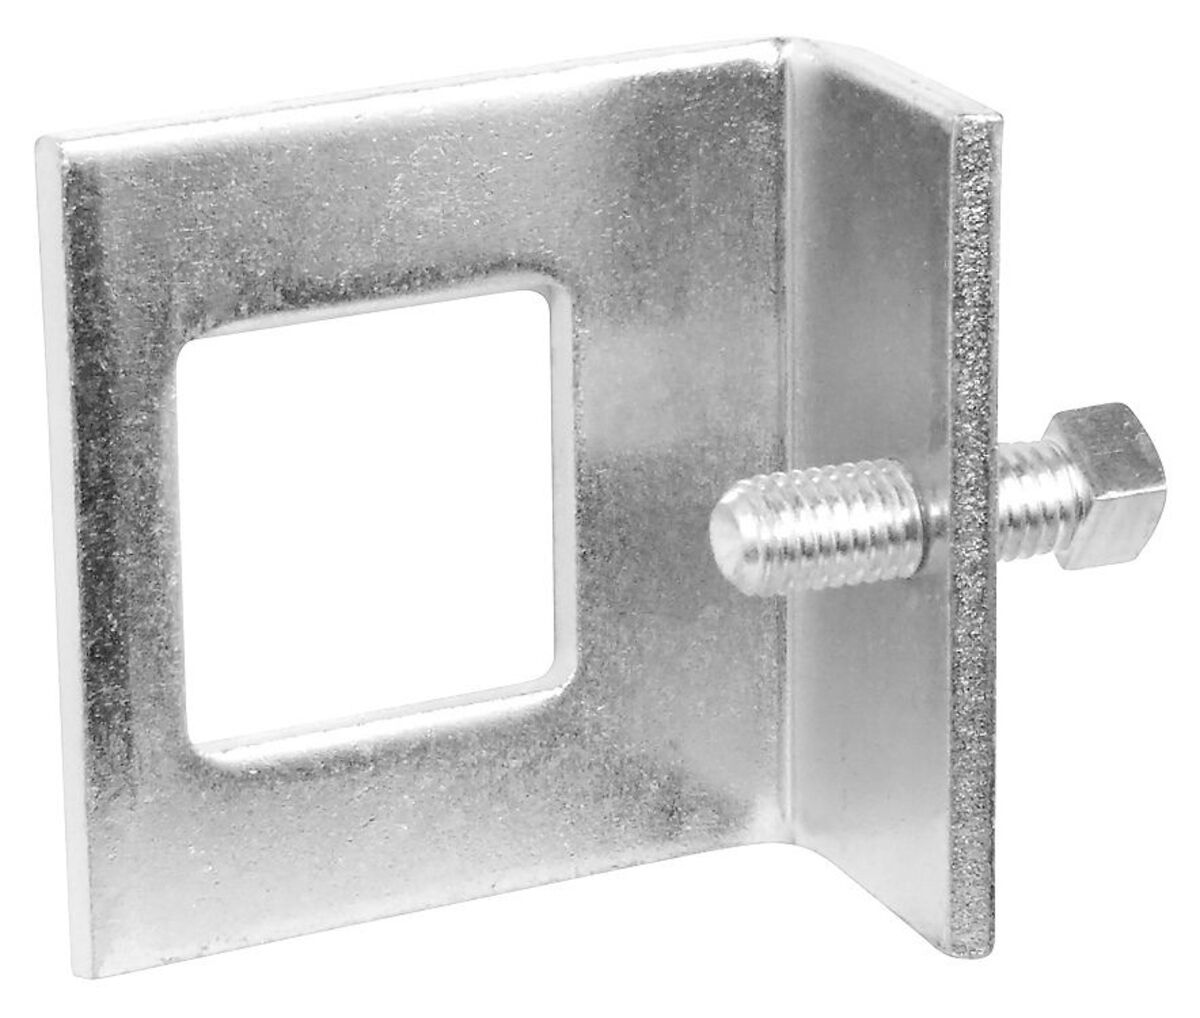 Strut To Beam Clamp Window For 1-5/8" Strut Zinc Plated Steel, 20 Pack